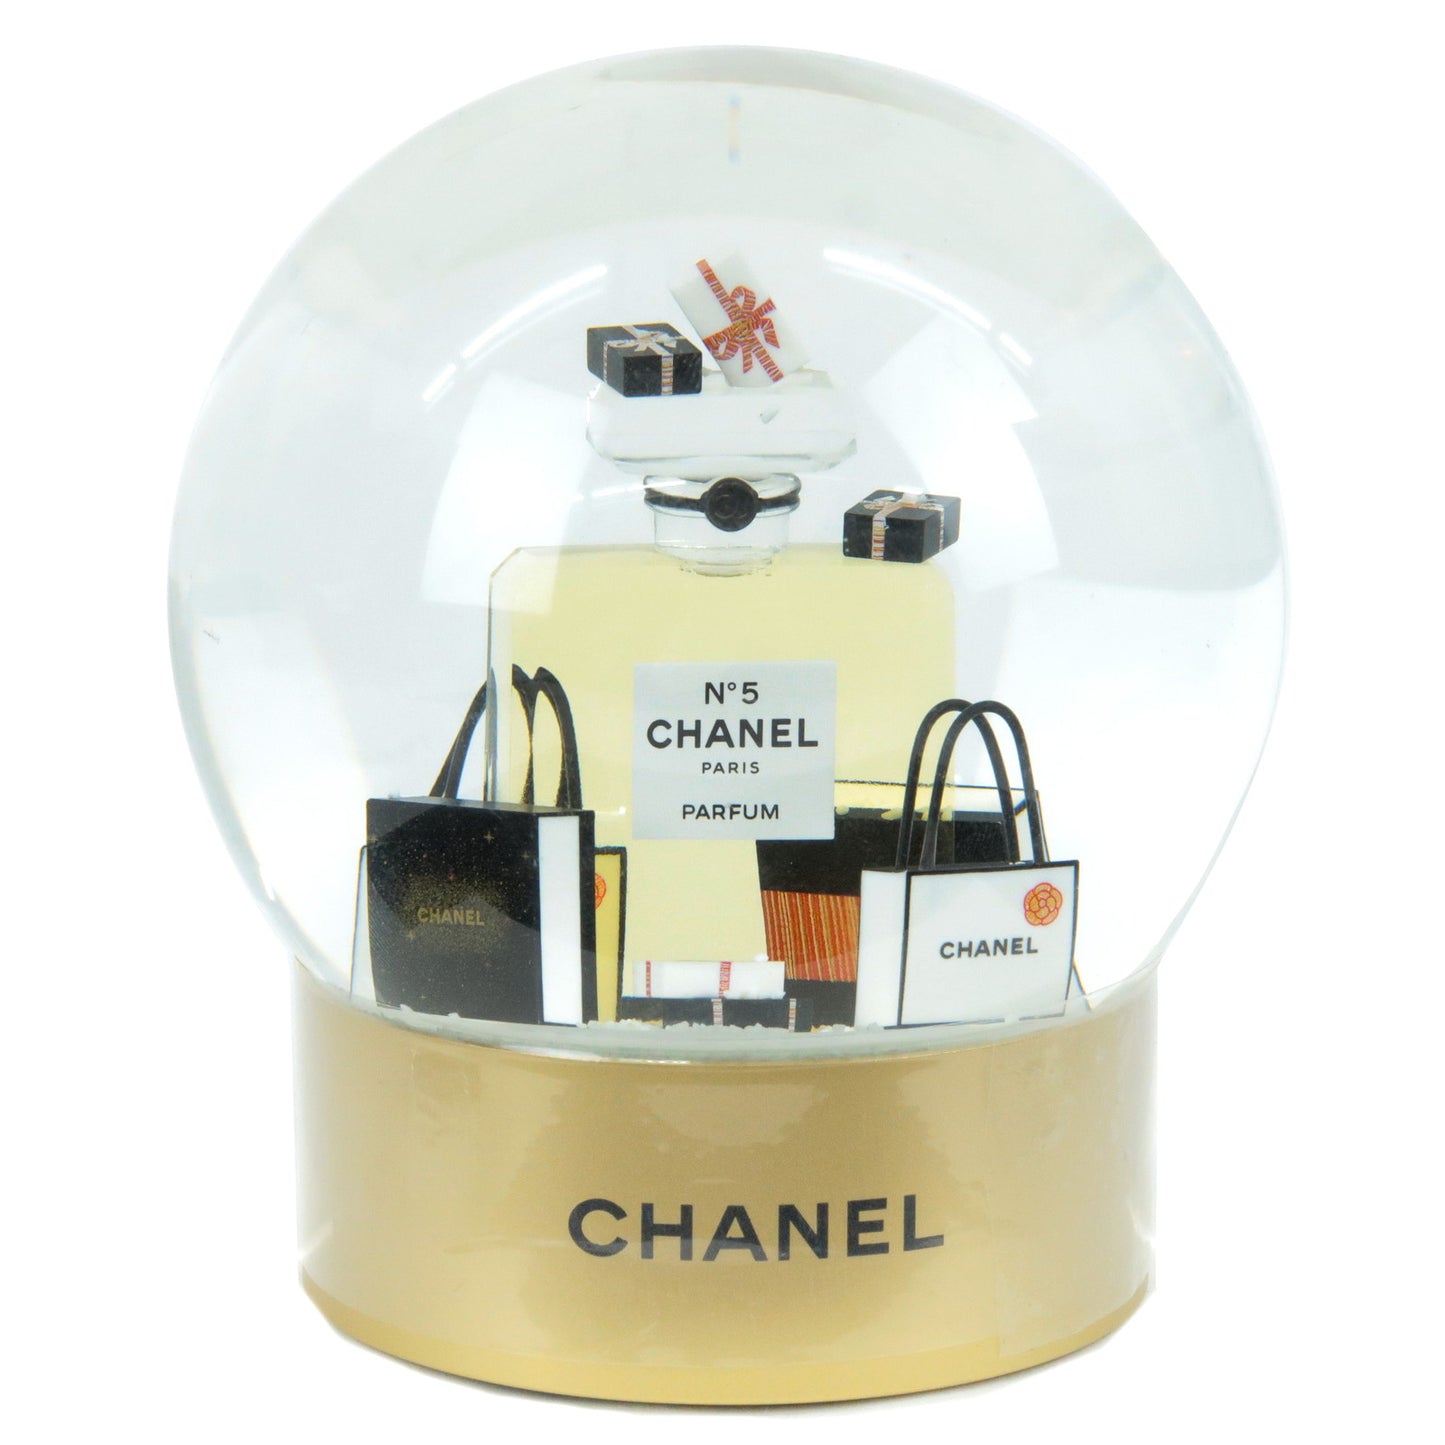 CHANEL-Snow-Globe-2021-Novelty-Brand-Accessory-Collection